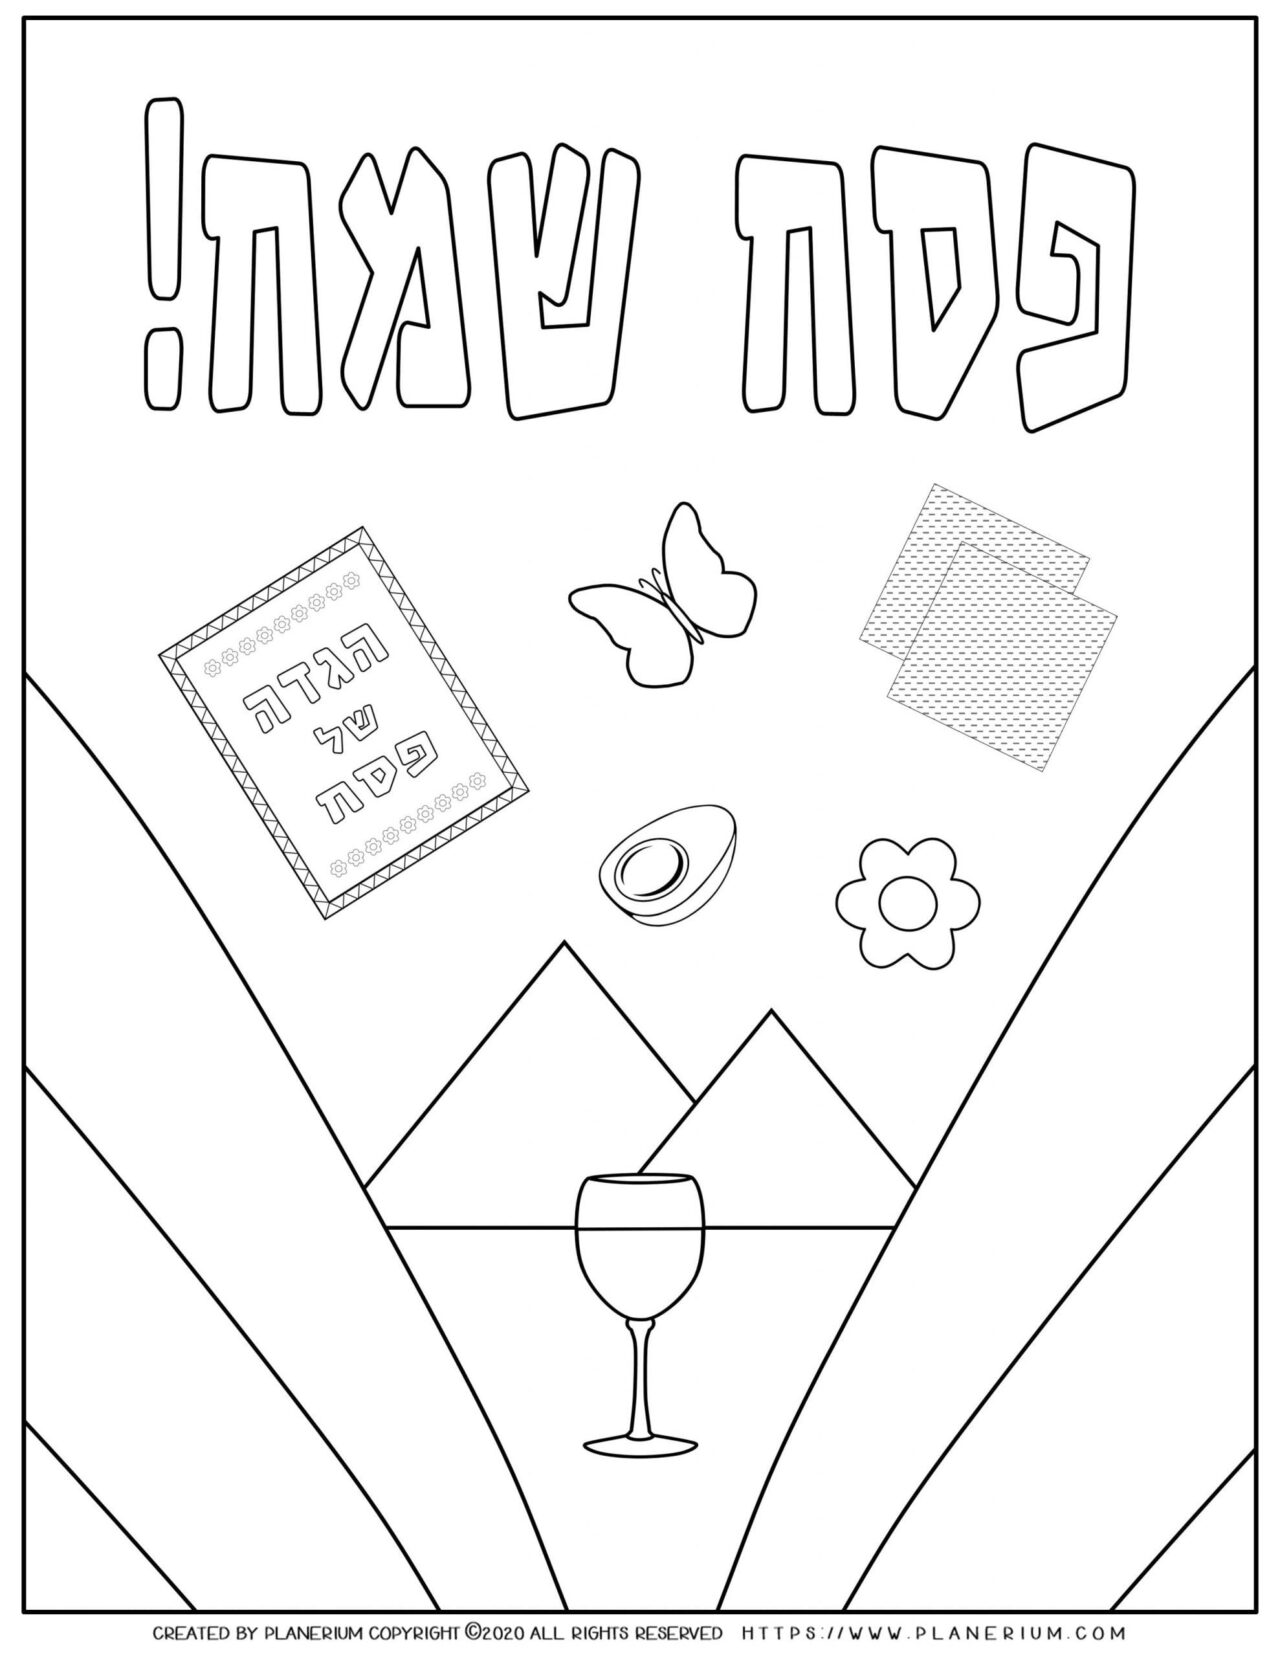 Passover coloring page - Happy Passover - Hebrew title